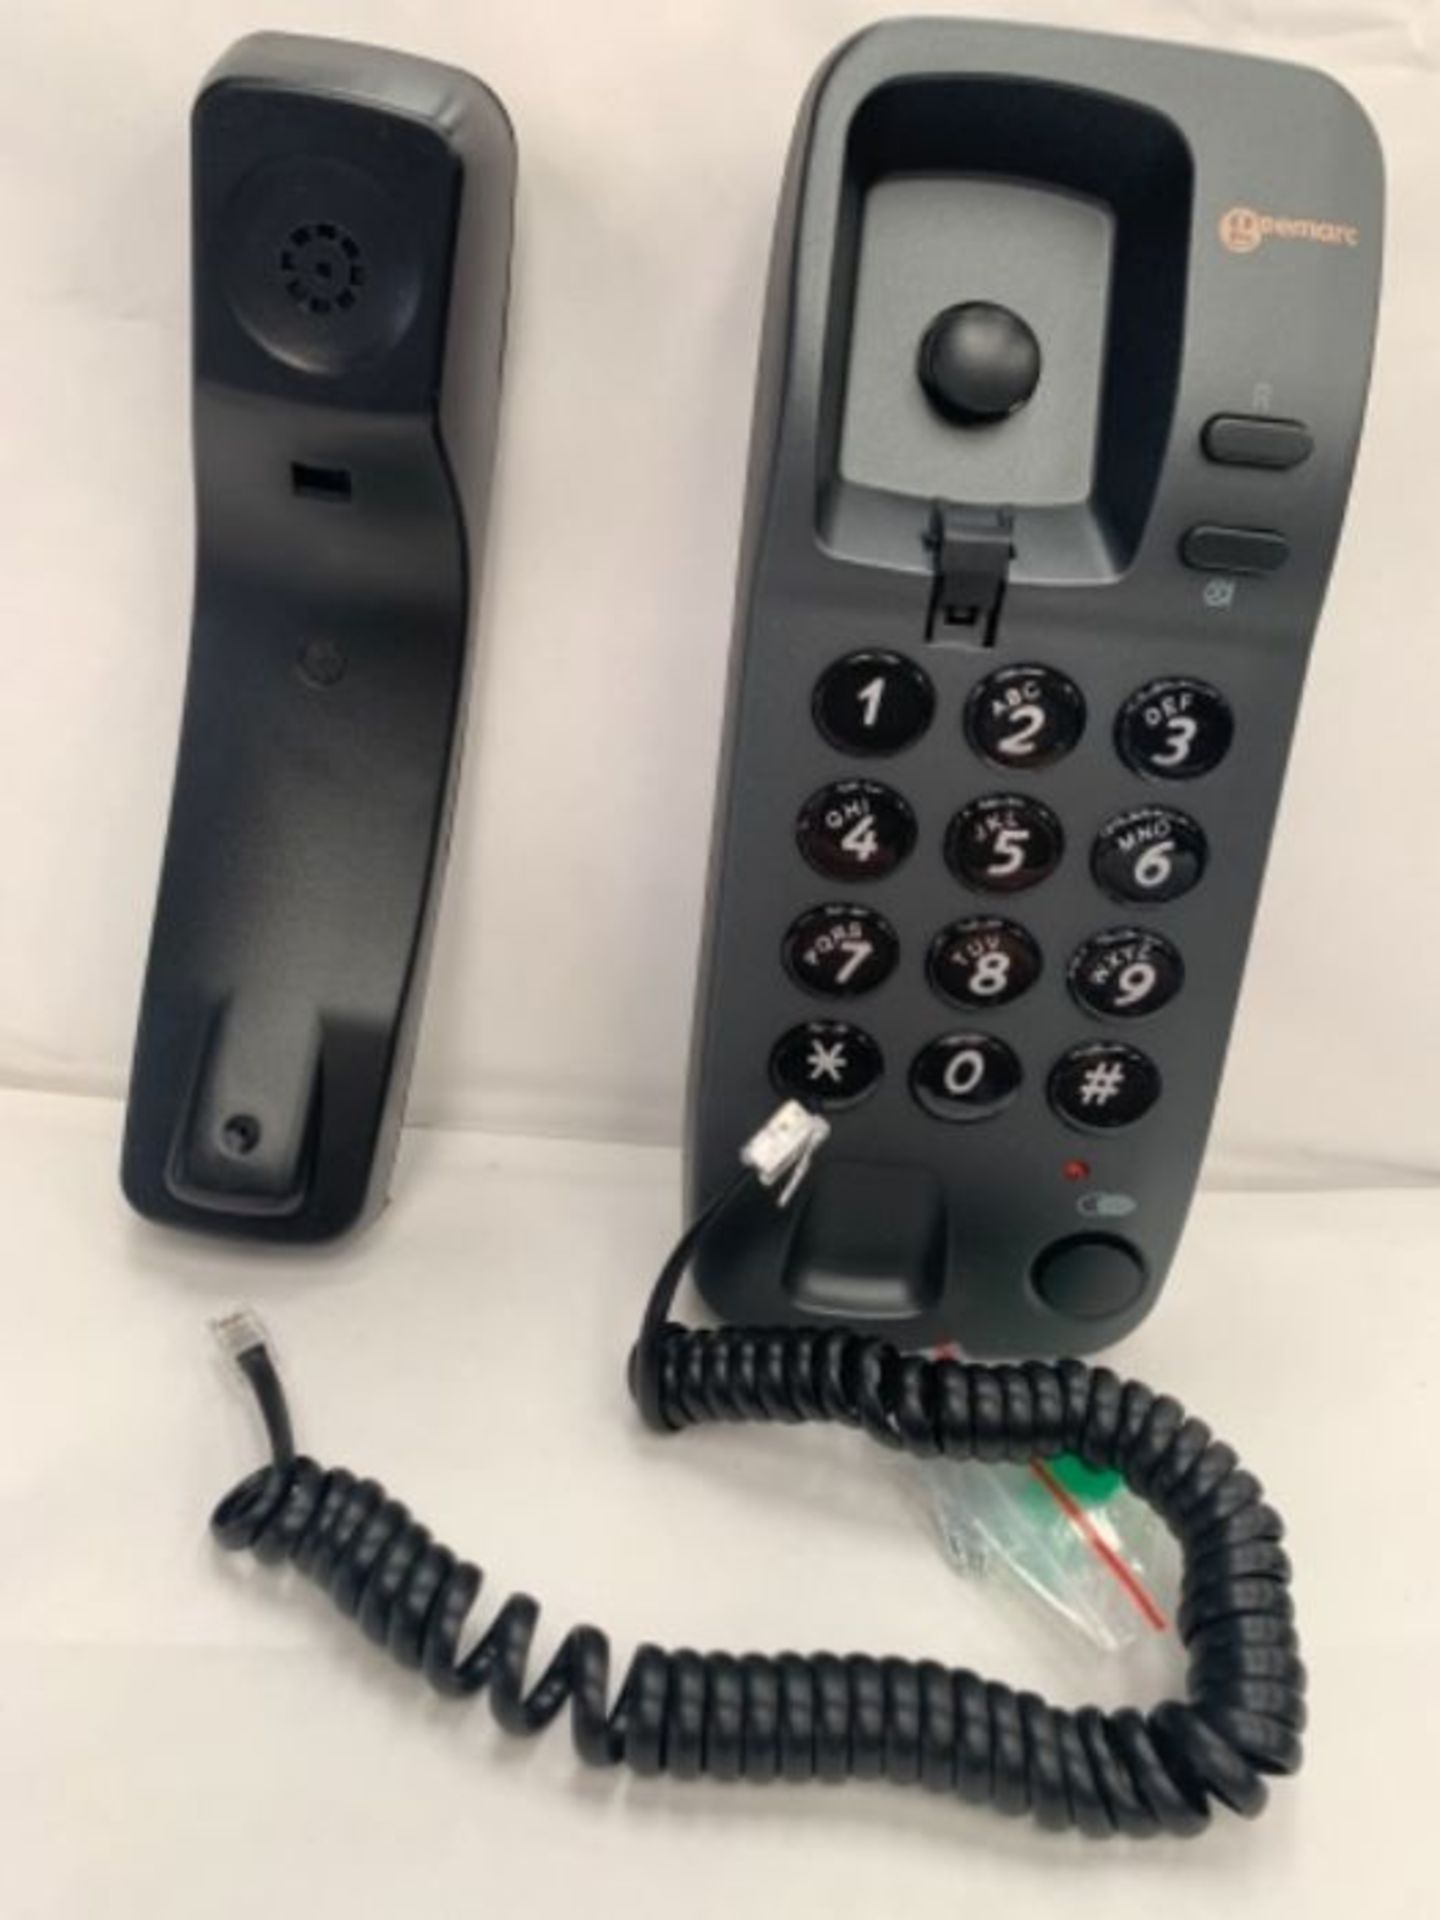 Geemarc Marbella - Gondola Style Corded Analogue Telephone with Large Buttons, Mute Fu - Image 2 of 2